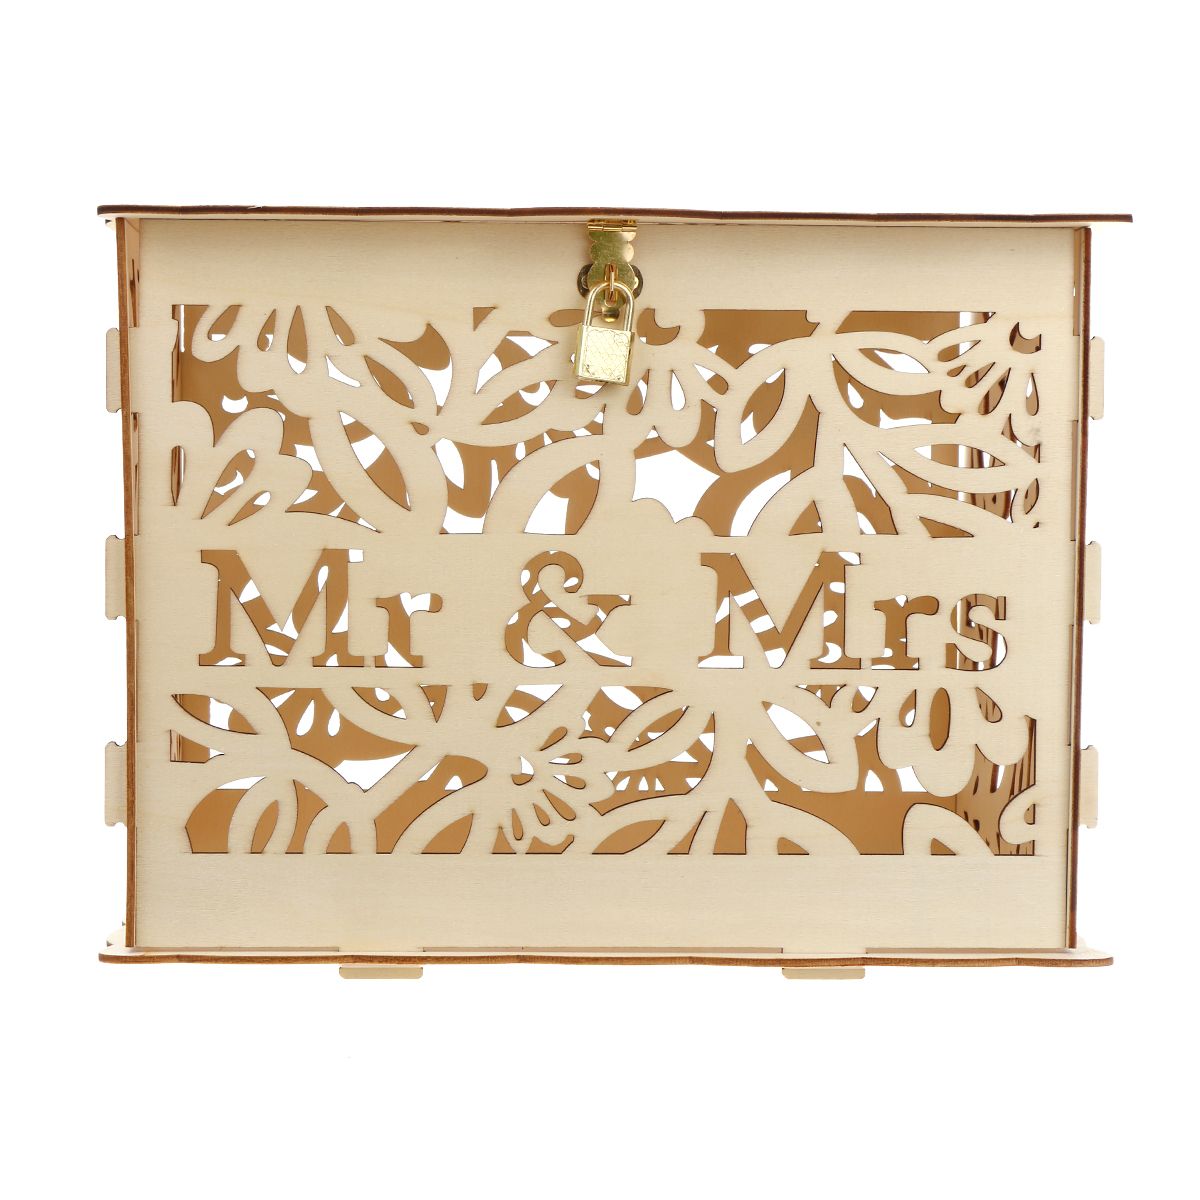 Wedding-Card-Post-Wooden-Box-Collection-Gift-Card-Boxes-with-Lock-Patry-Decor-1642918